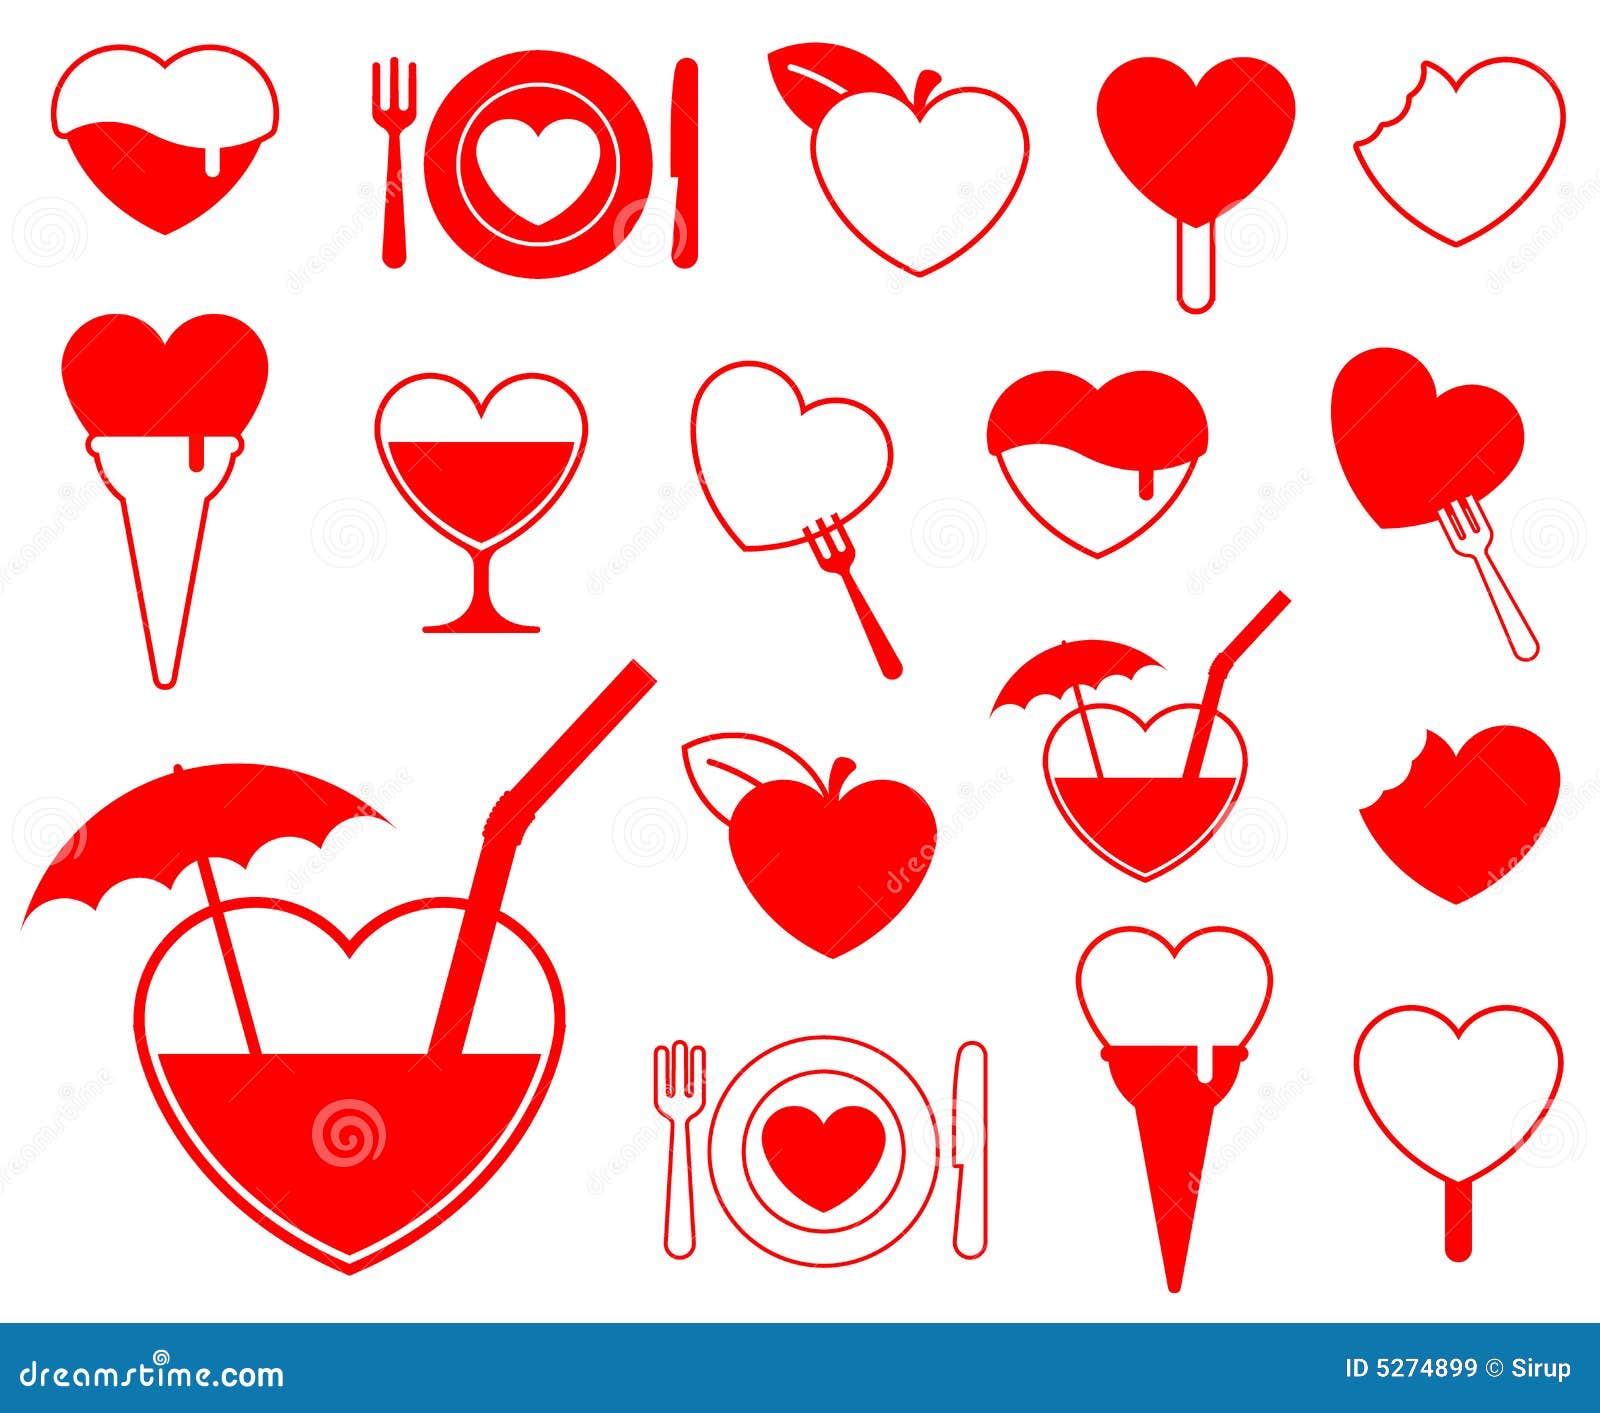 clipart icon collection - photo #49